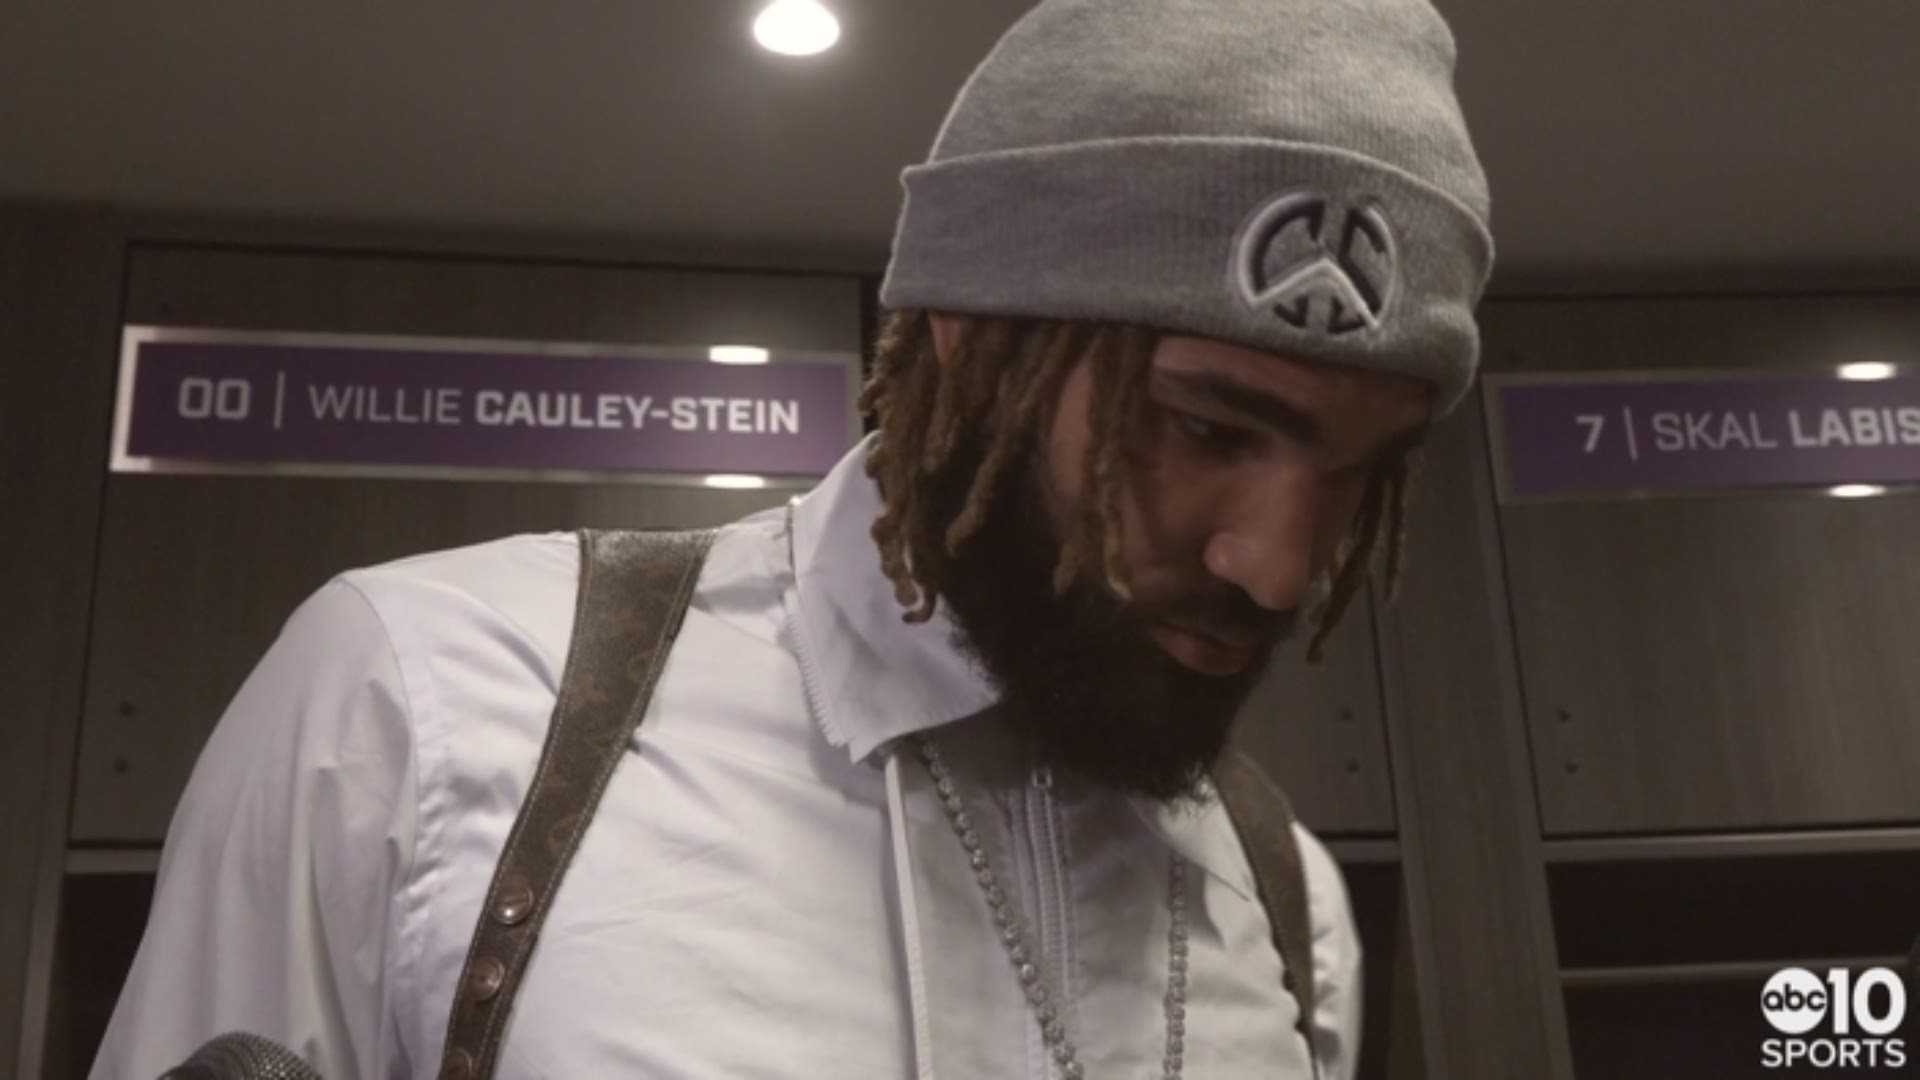 Kings center Willie Cauley-Stein discusses Tuesday's loss at home to Toronto, working back Bogdan Bogdanovic into the rotation and his observations of the Raptors as one of the league's best teams.